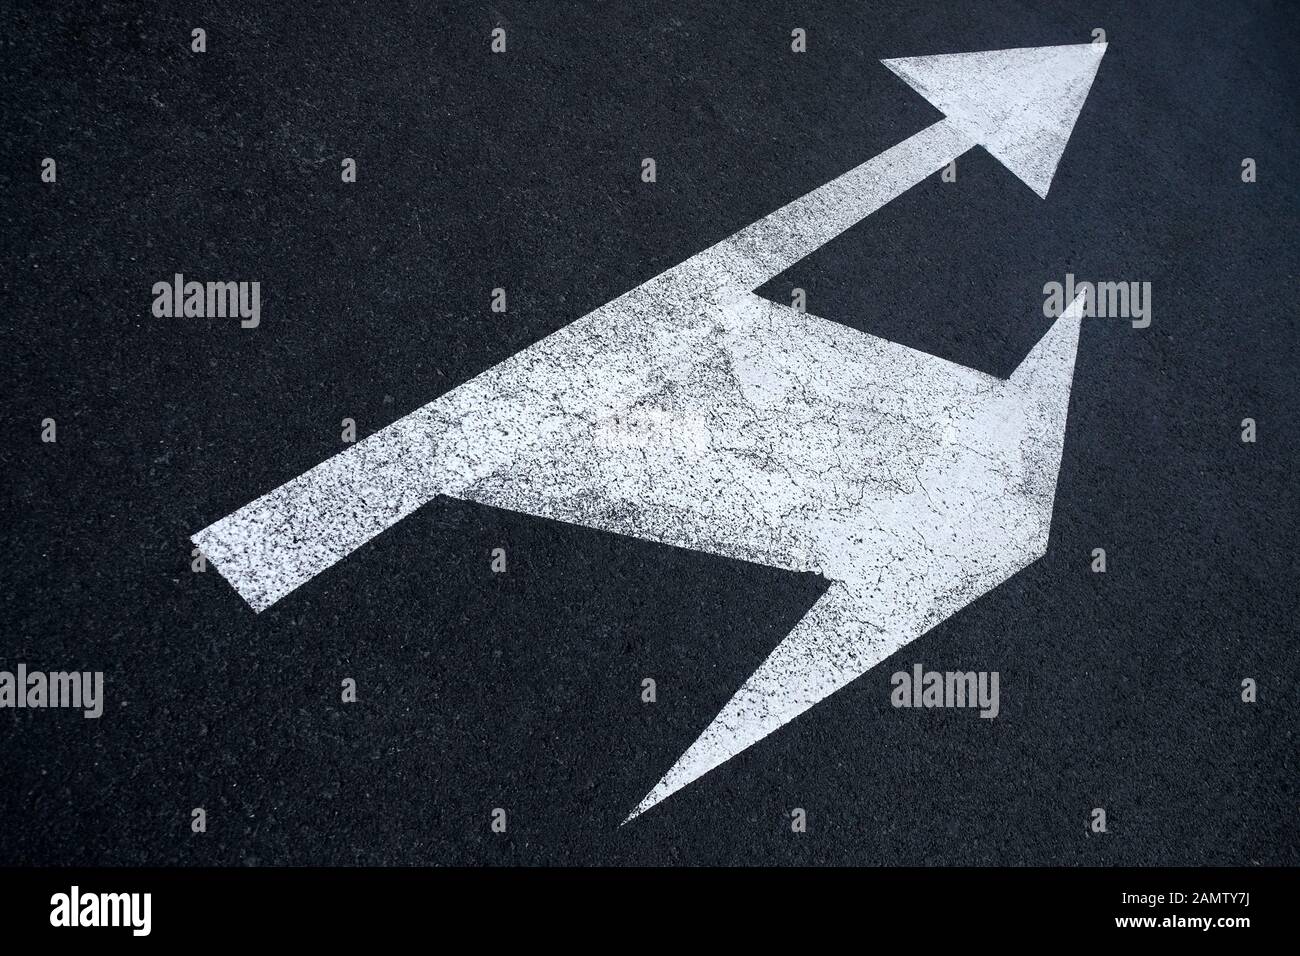 Split arrows directions icon painted on black pavement. Stock Photo